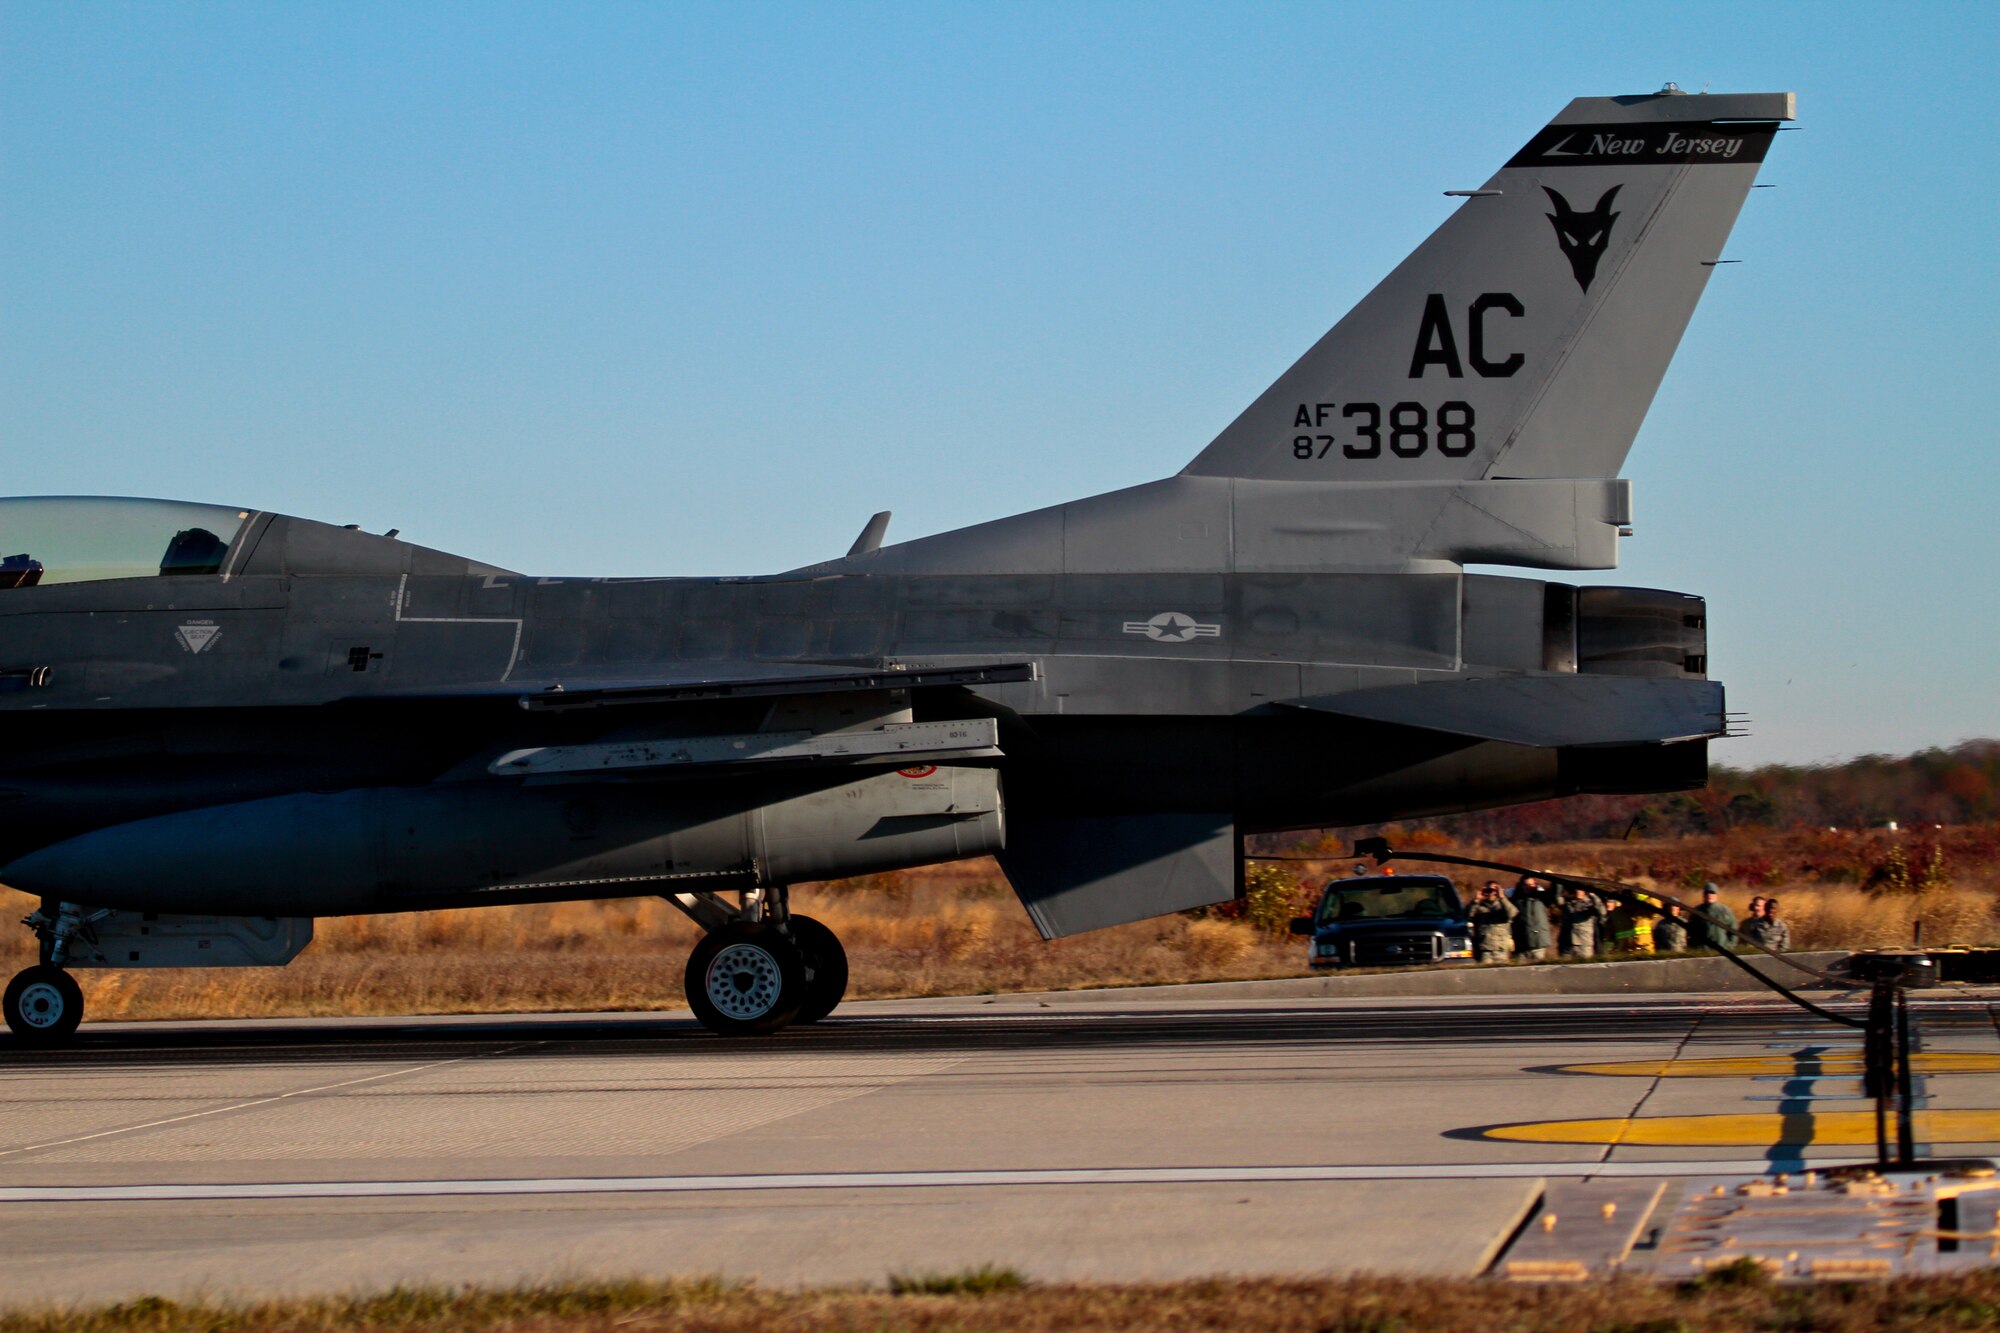 A picture of a U.S. Air Force F-16D, piloted by Maj. Jason Halvorsen, catching an arrestor cable with it's tailhook.